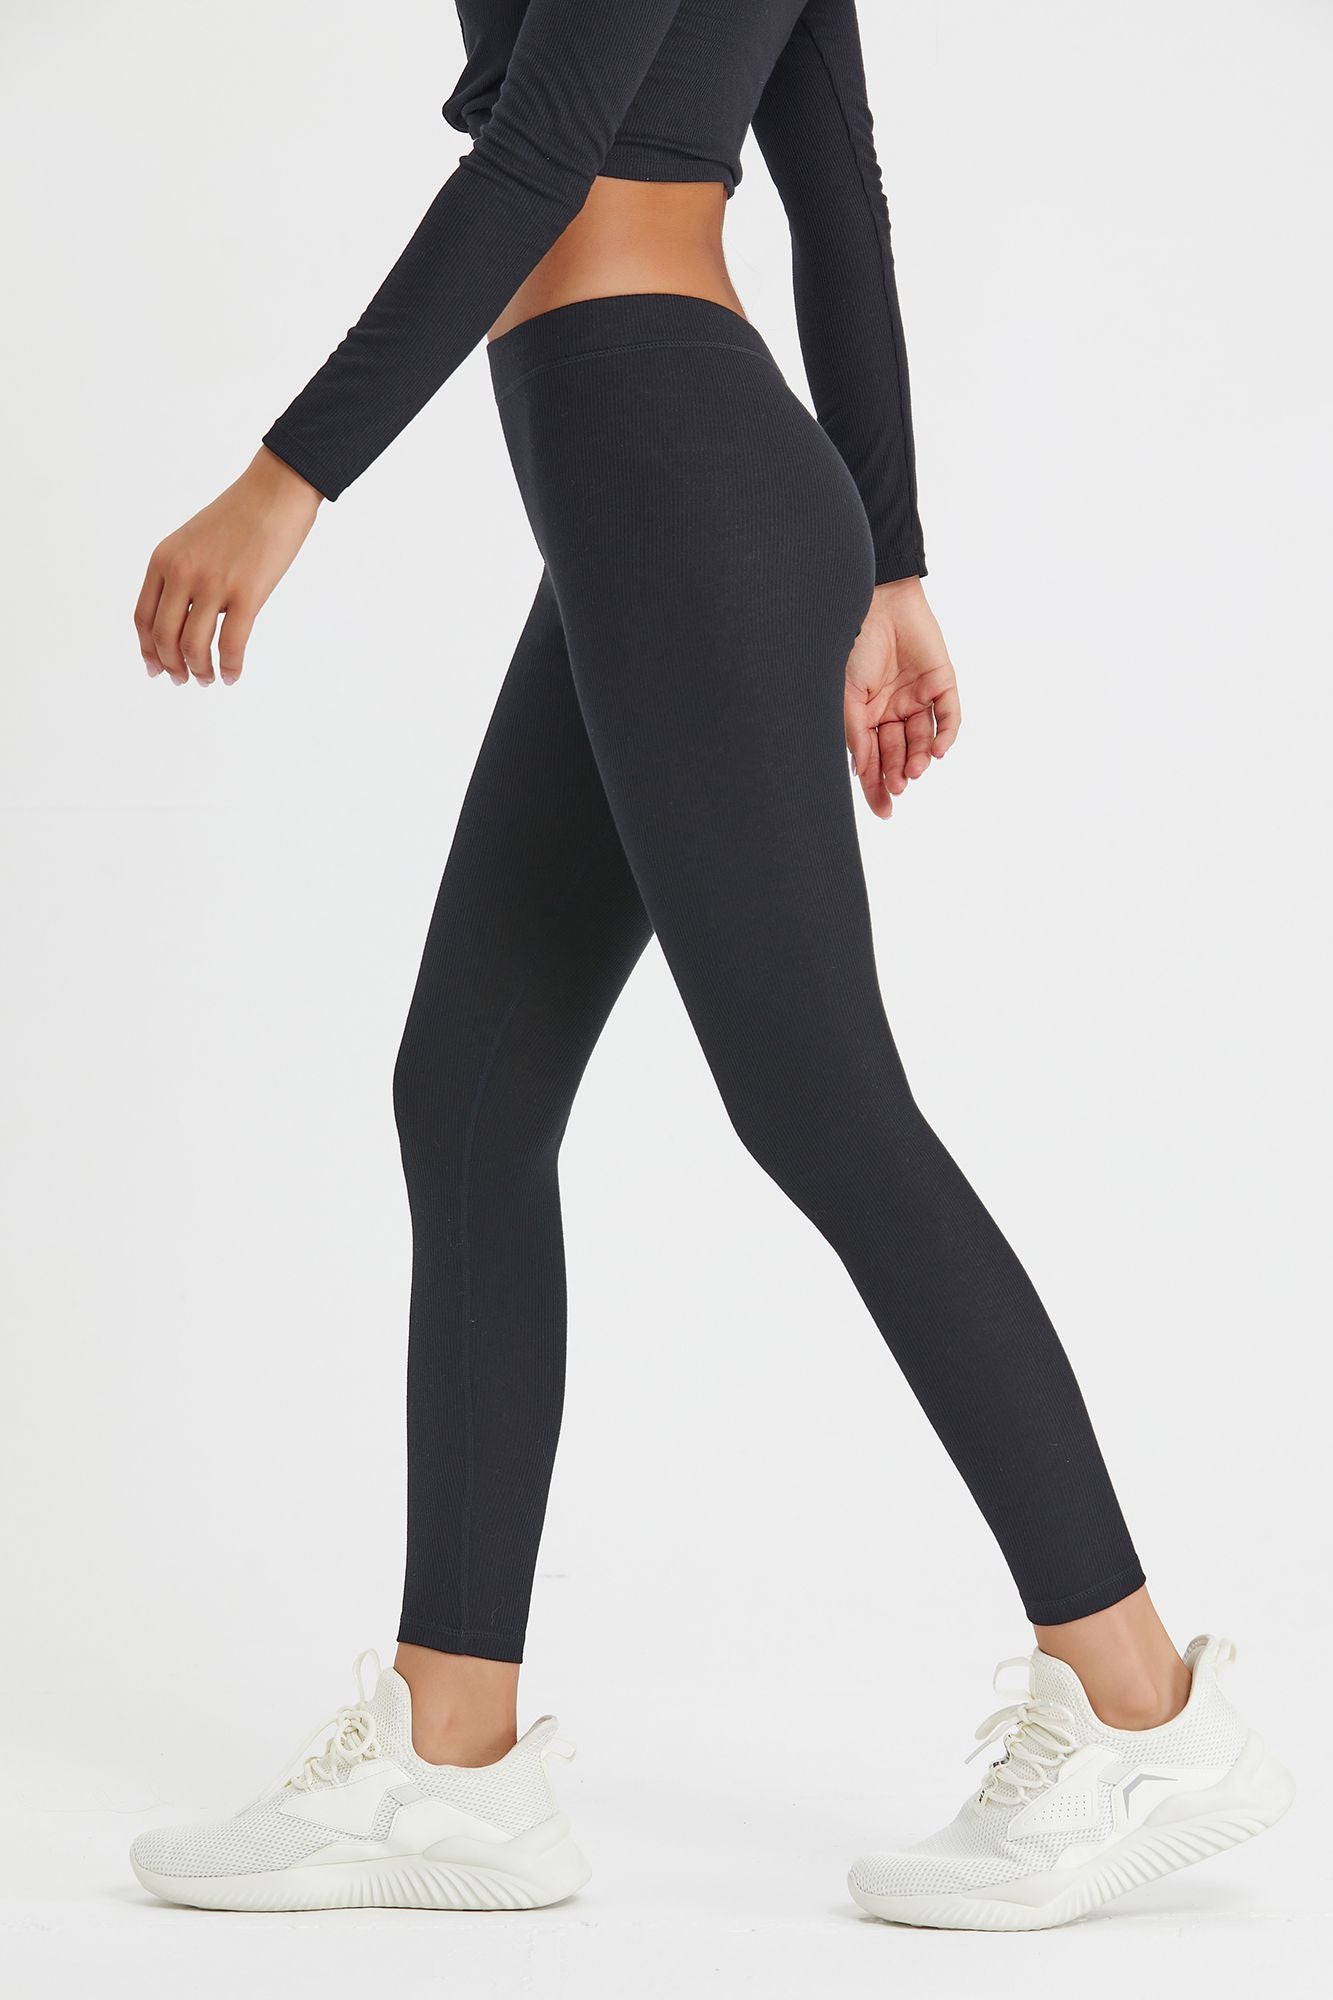 Women's Ribbed Mid-Waist Tummy Control Workout Front Seam Leggings